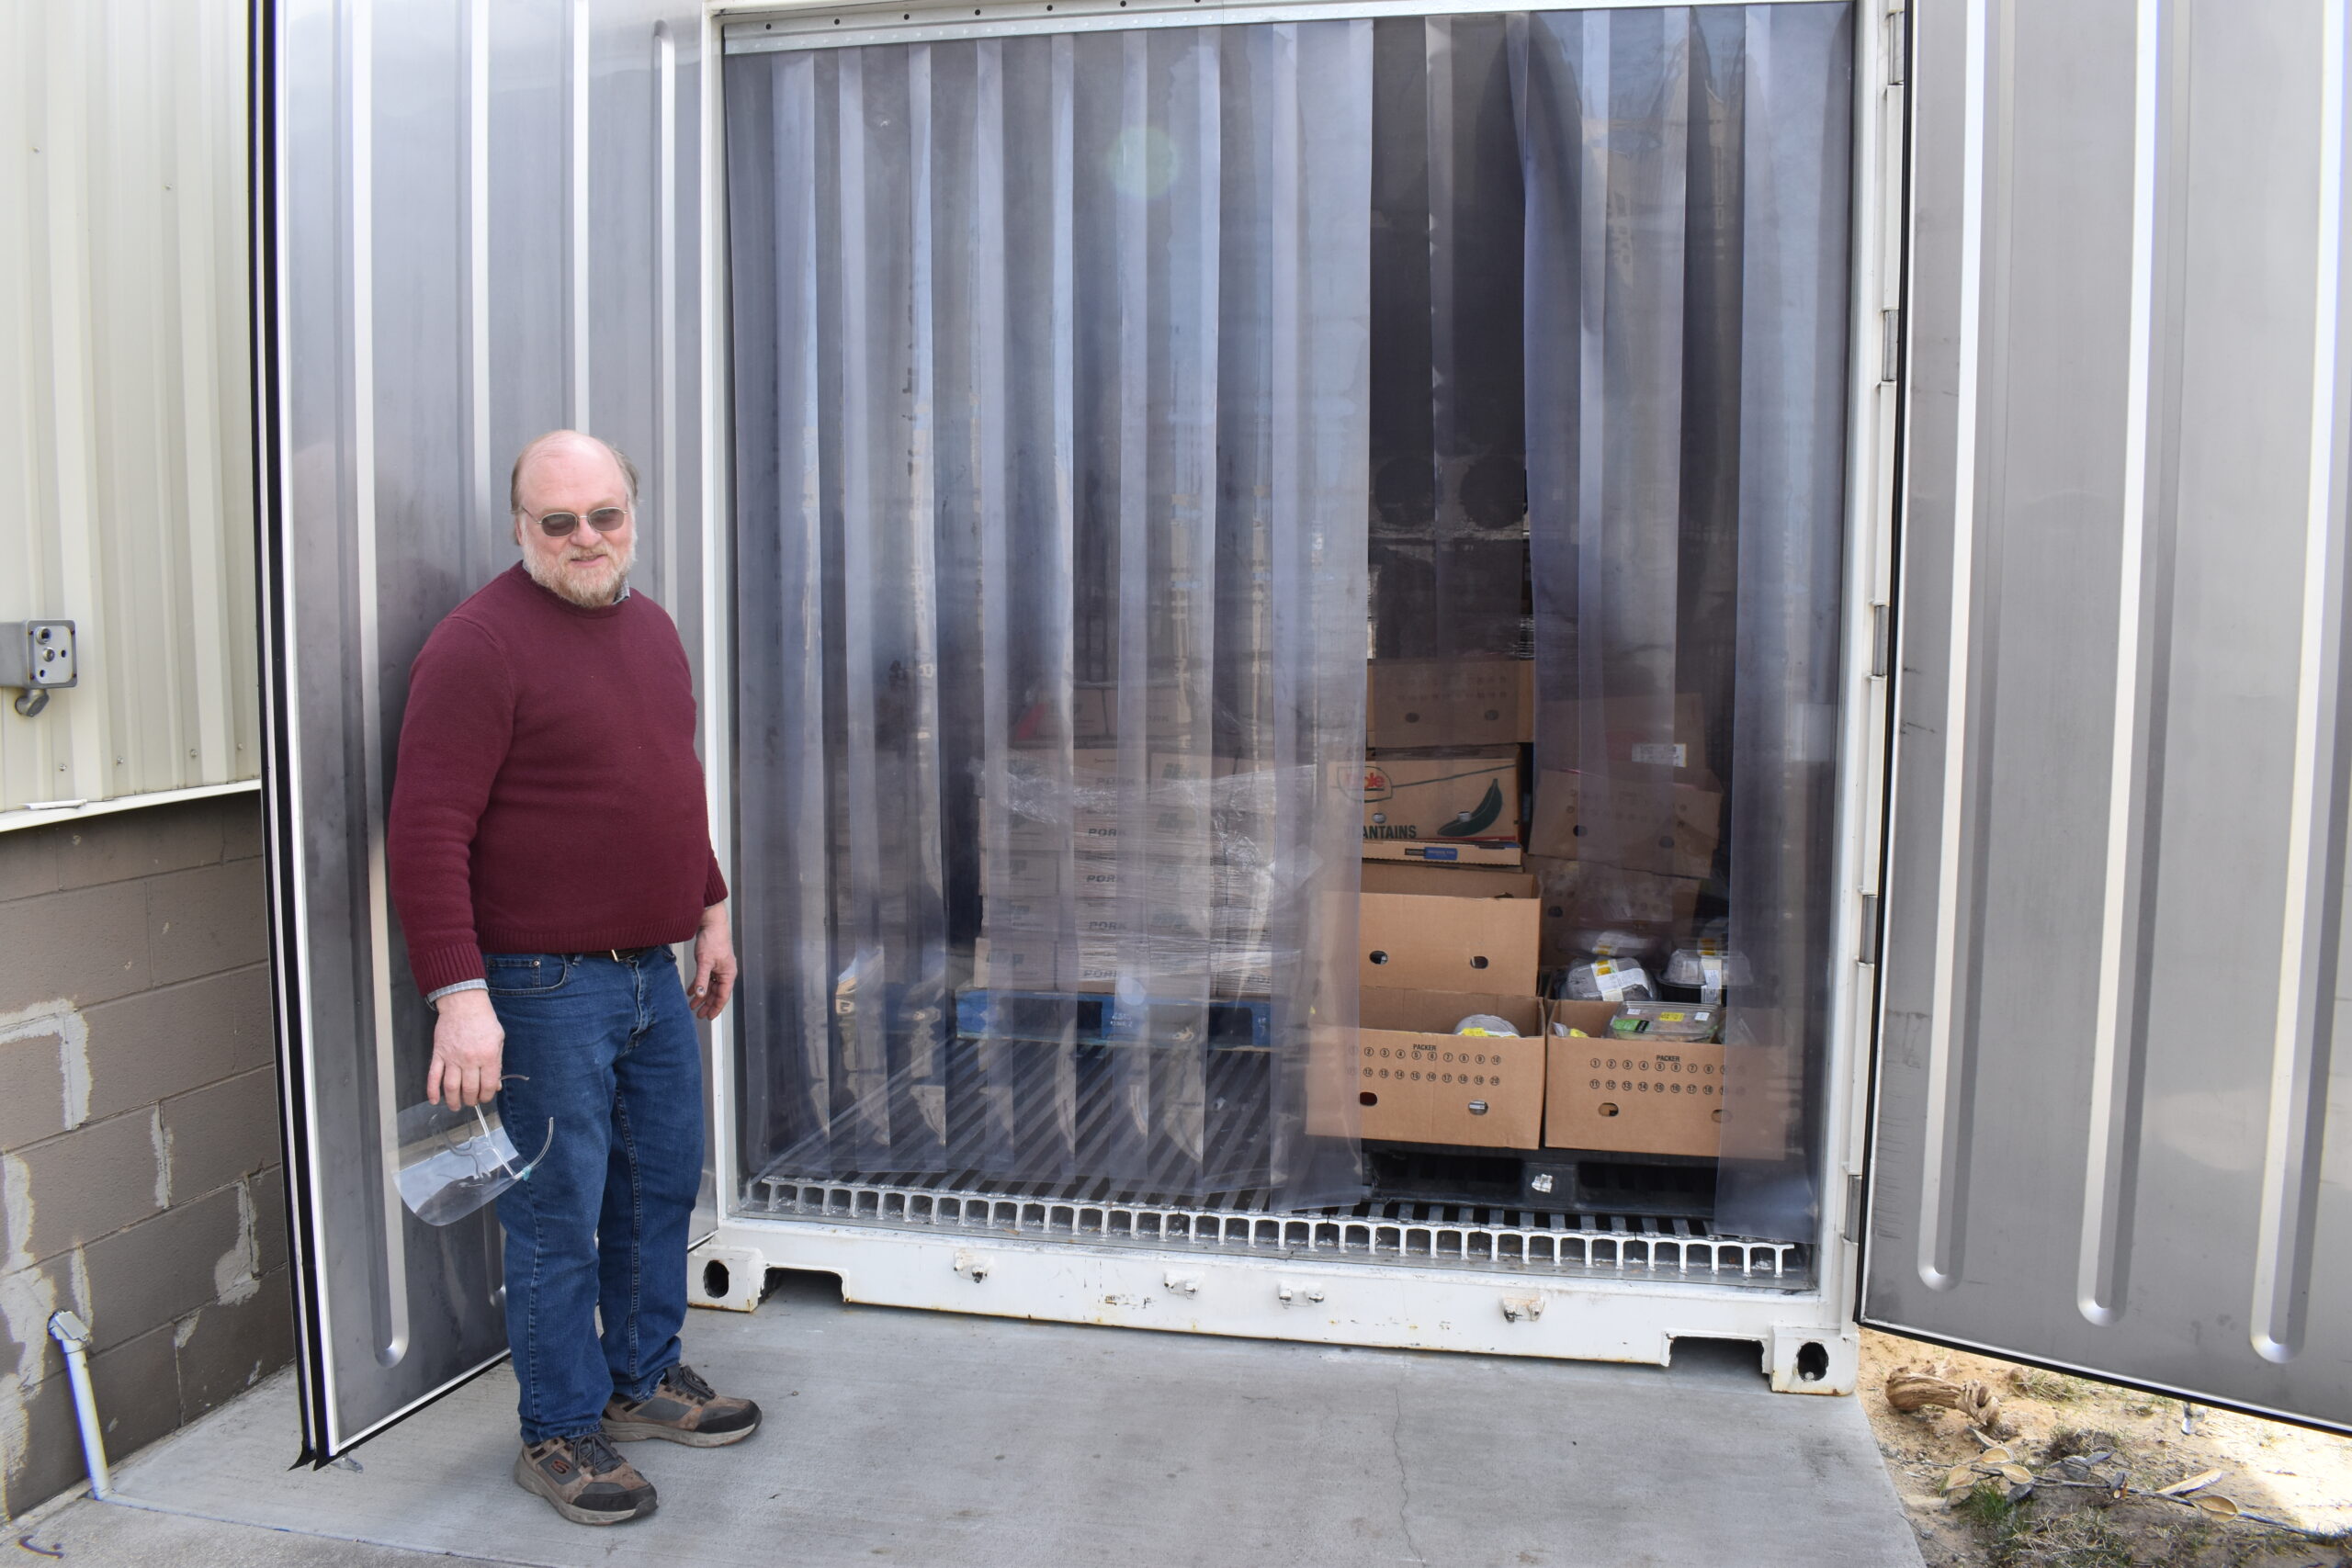 Rich poses in front of his new freezer, a large shipping container.